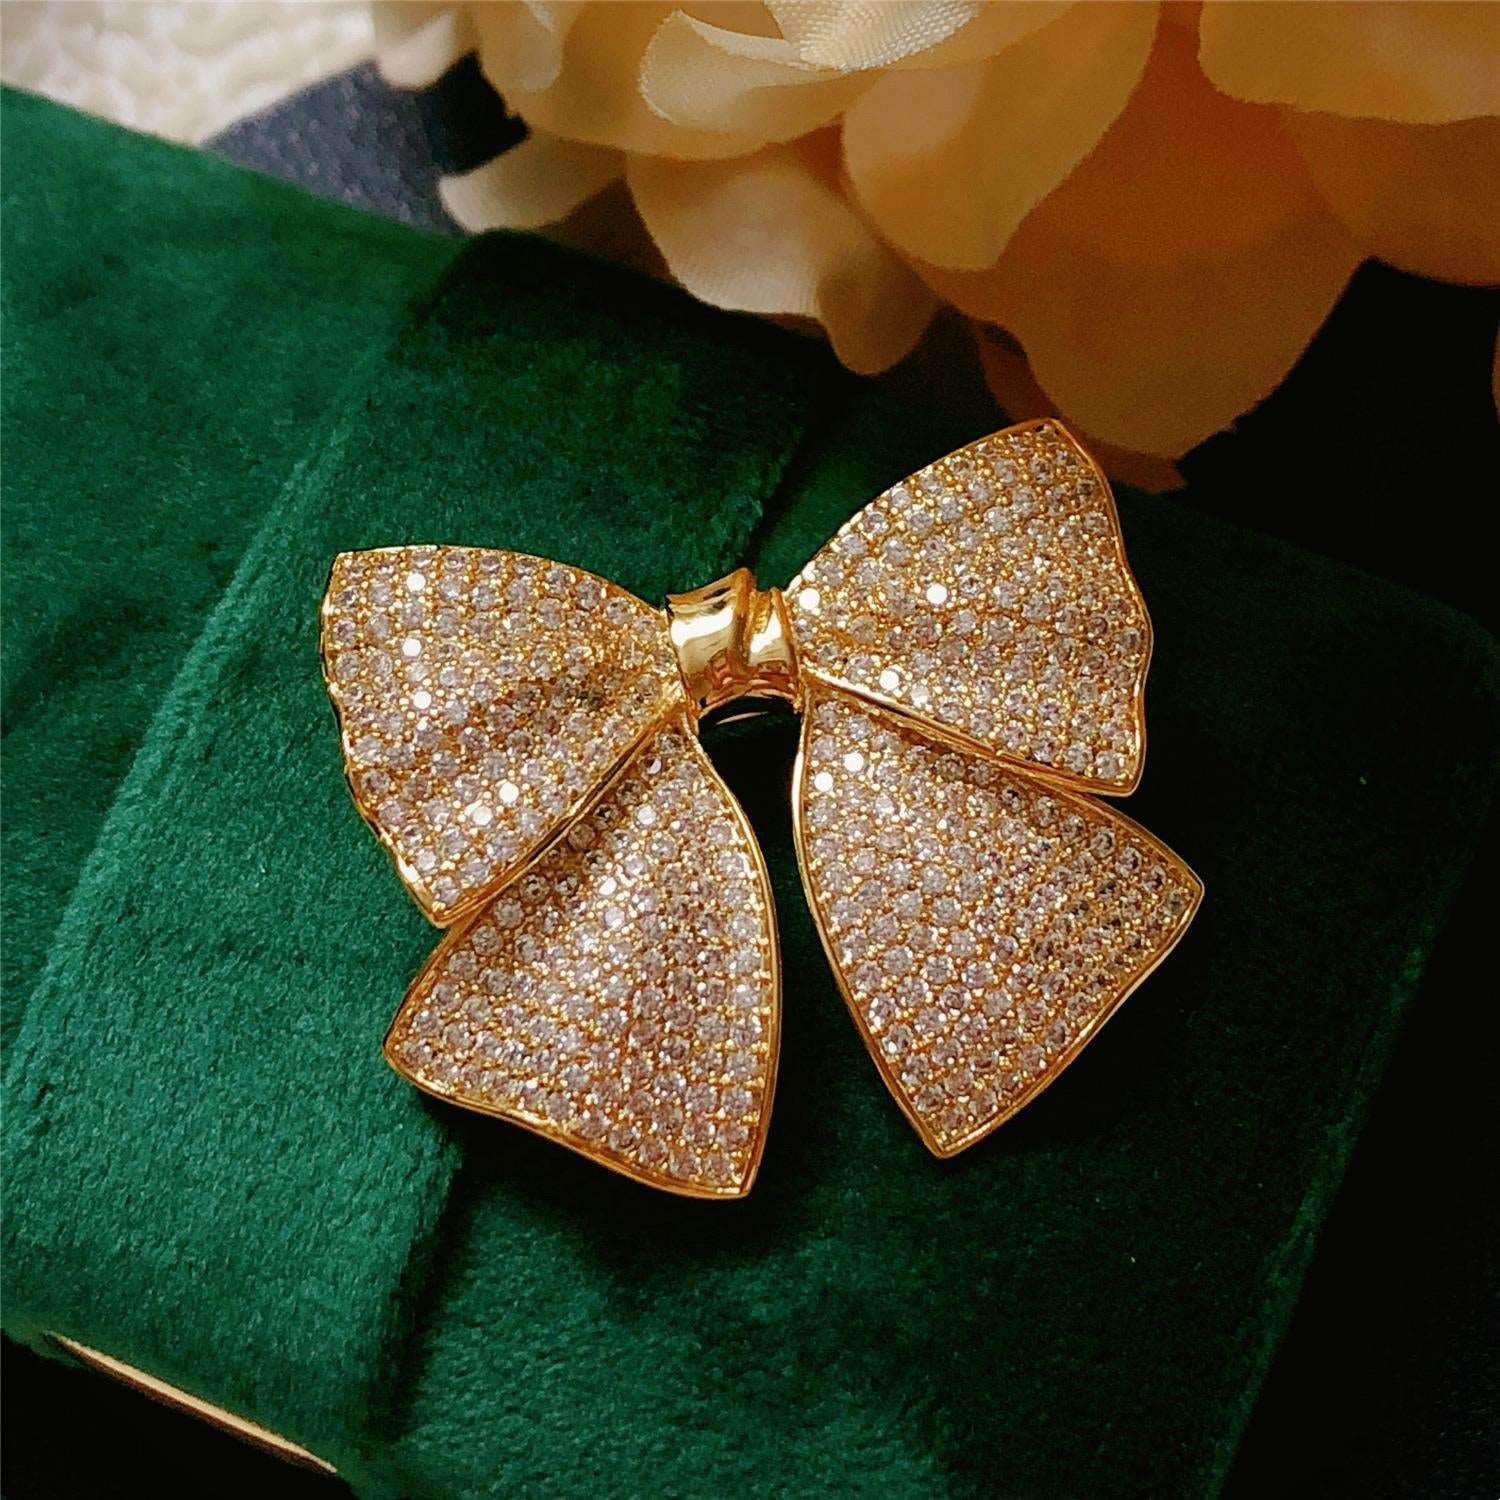 Feminine White Cubic Zirconia Gold Bow Brooch Pin for Dresses, Coat or Scarf